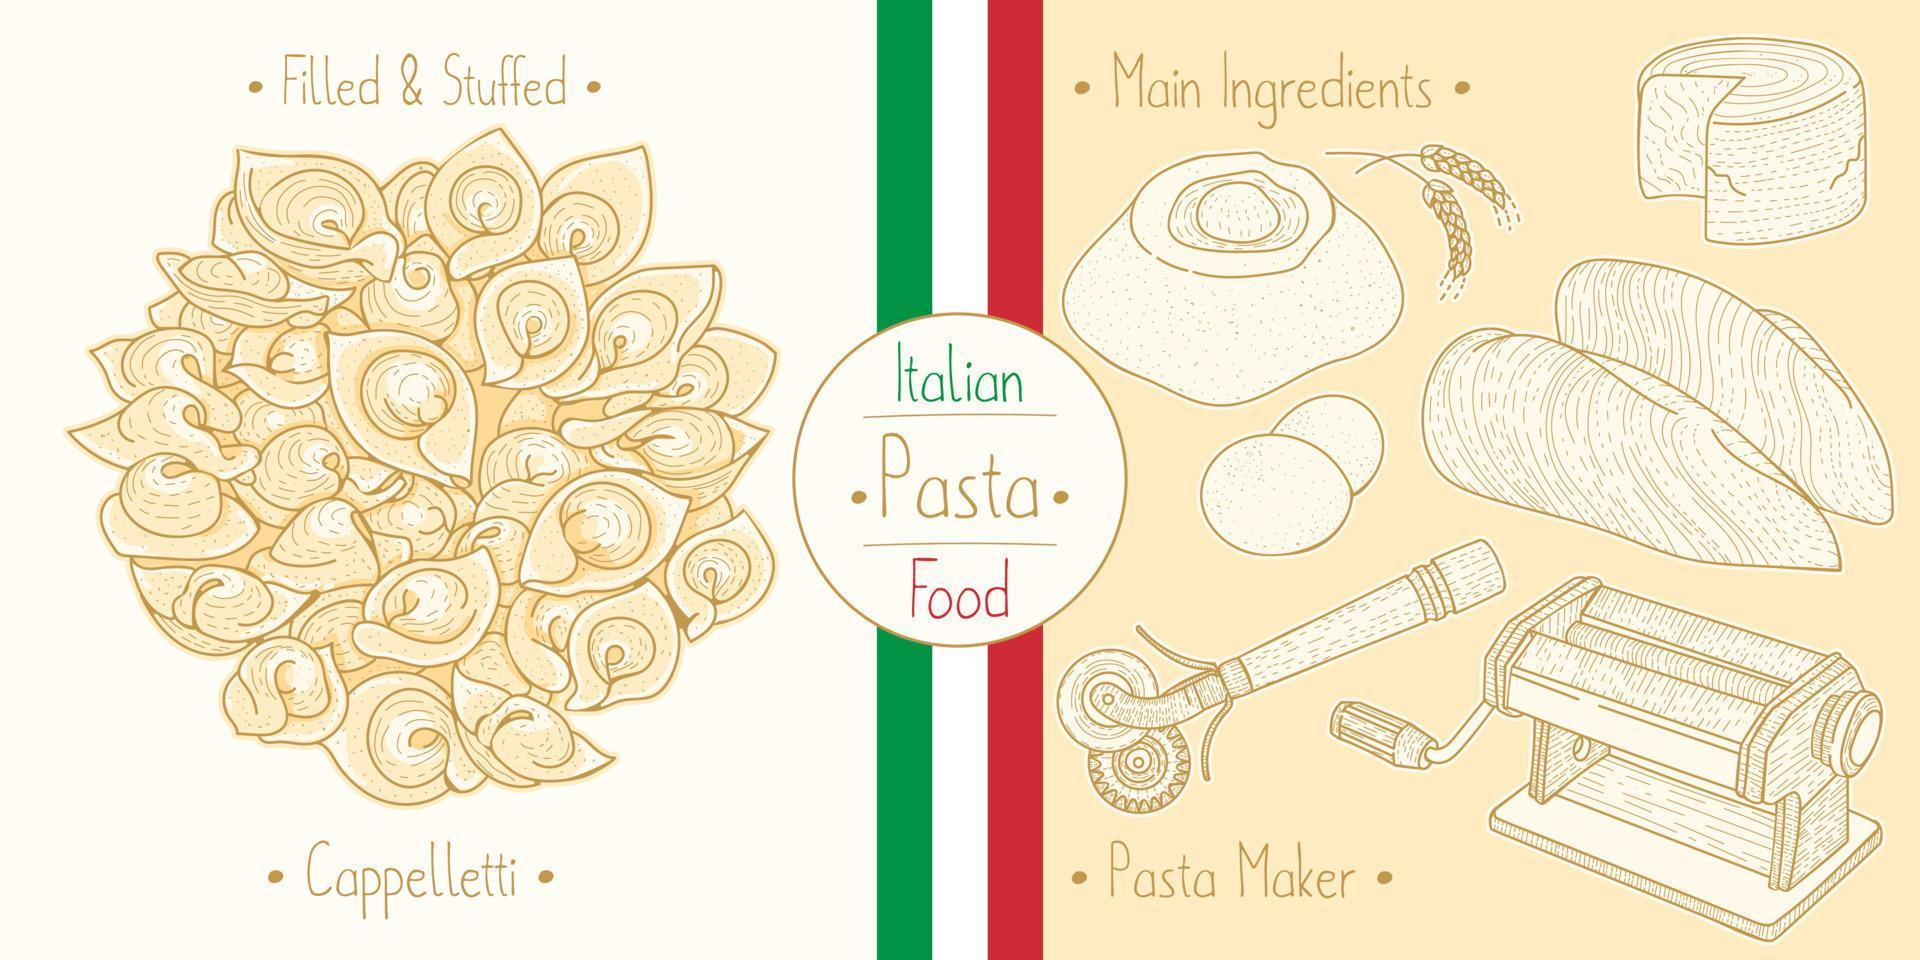 Cooking italian food Angel Hair pasta Capellini and main ingredients and pasta makers equipment, sketching illustration in vintage style vector